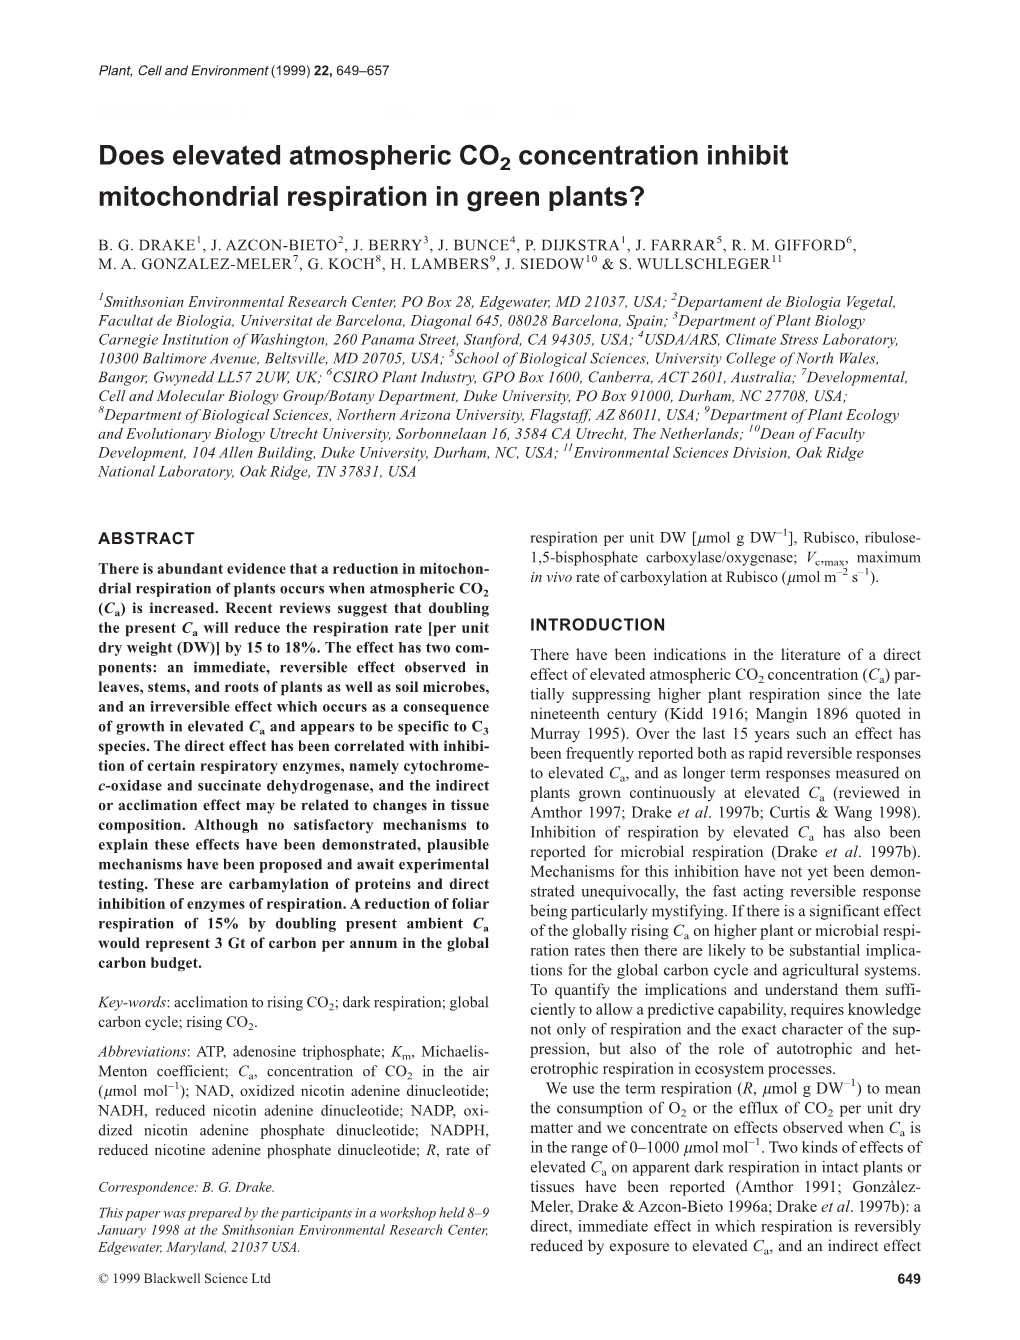 Does Elevated Atmospheric CO2 Concentration Inhibit Mitochondrial Respiration in Green Plants?